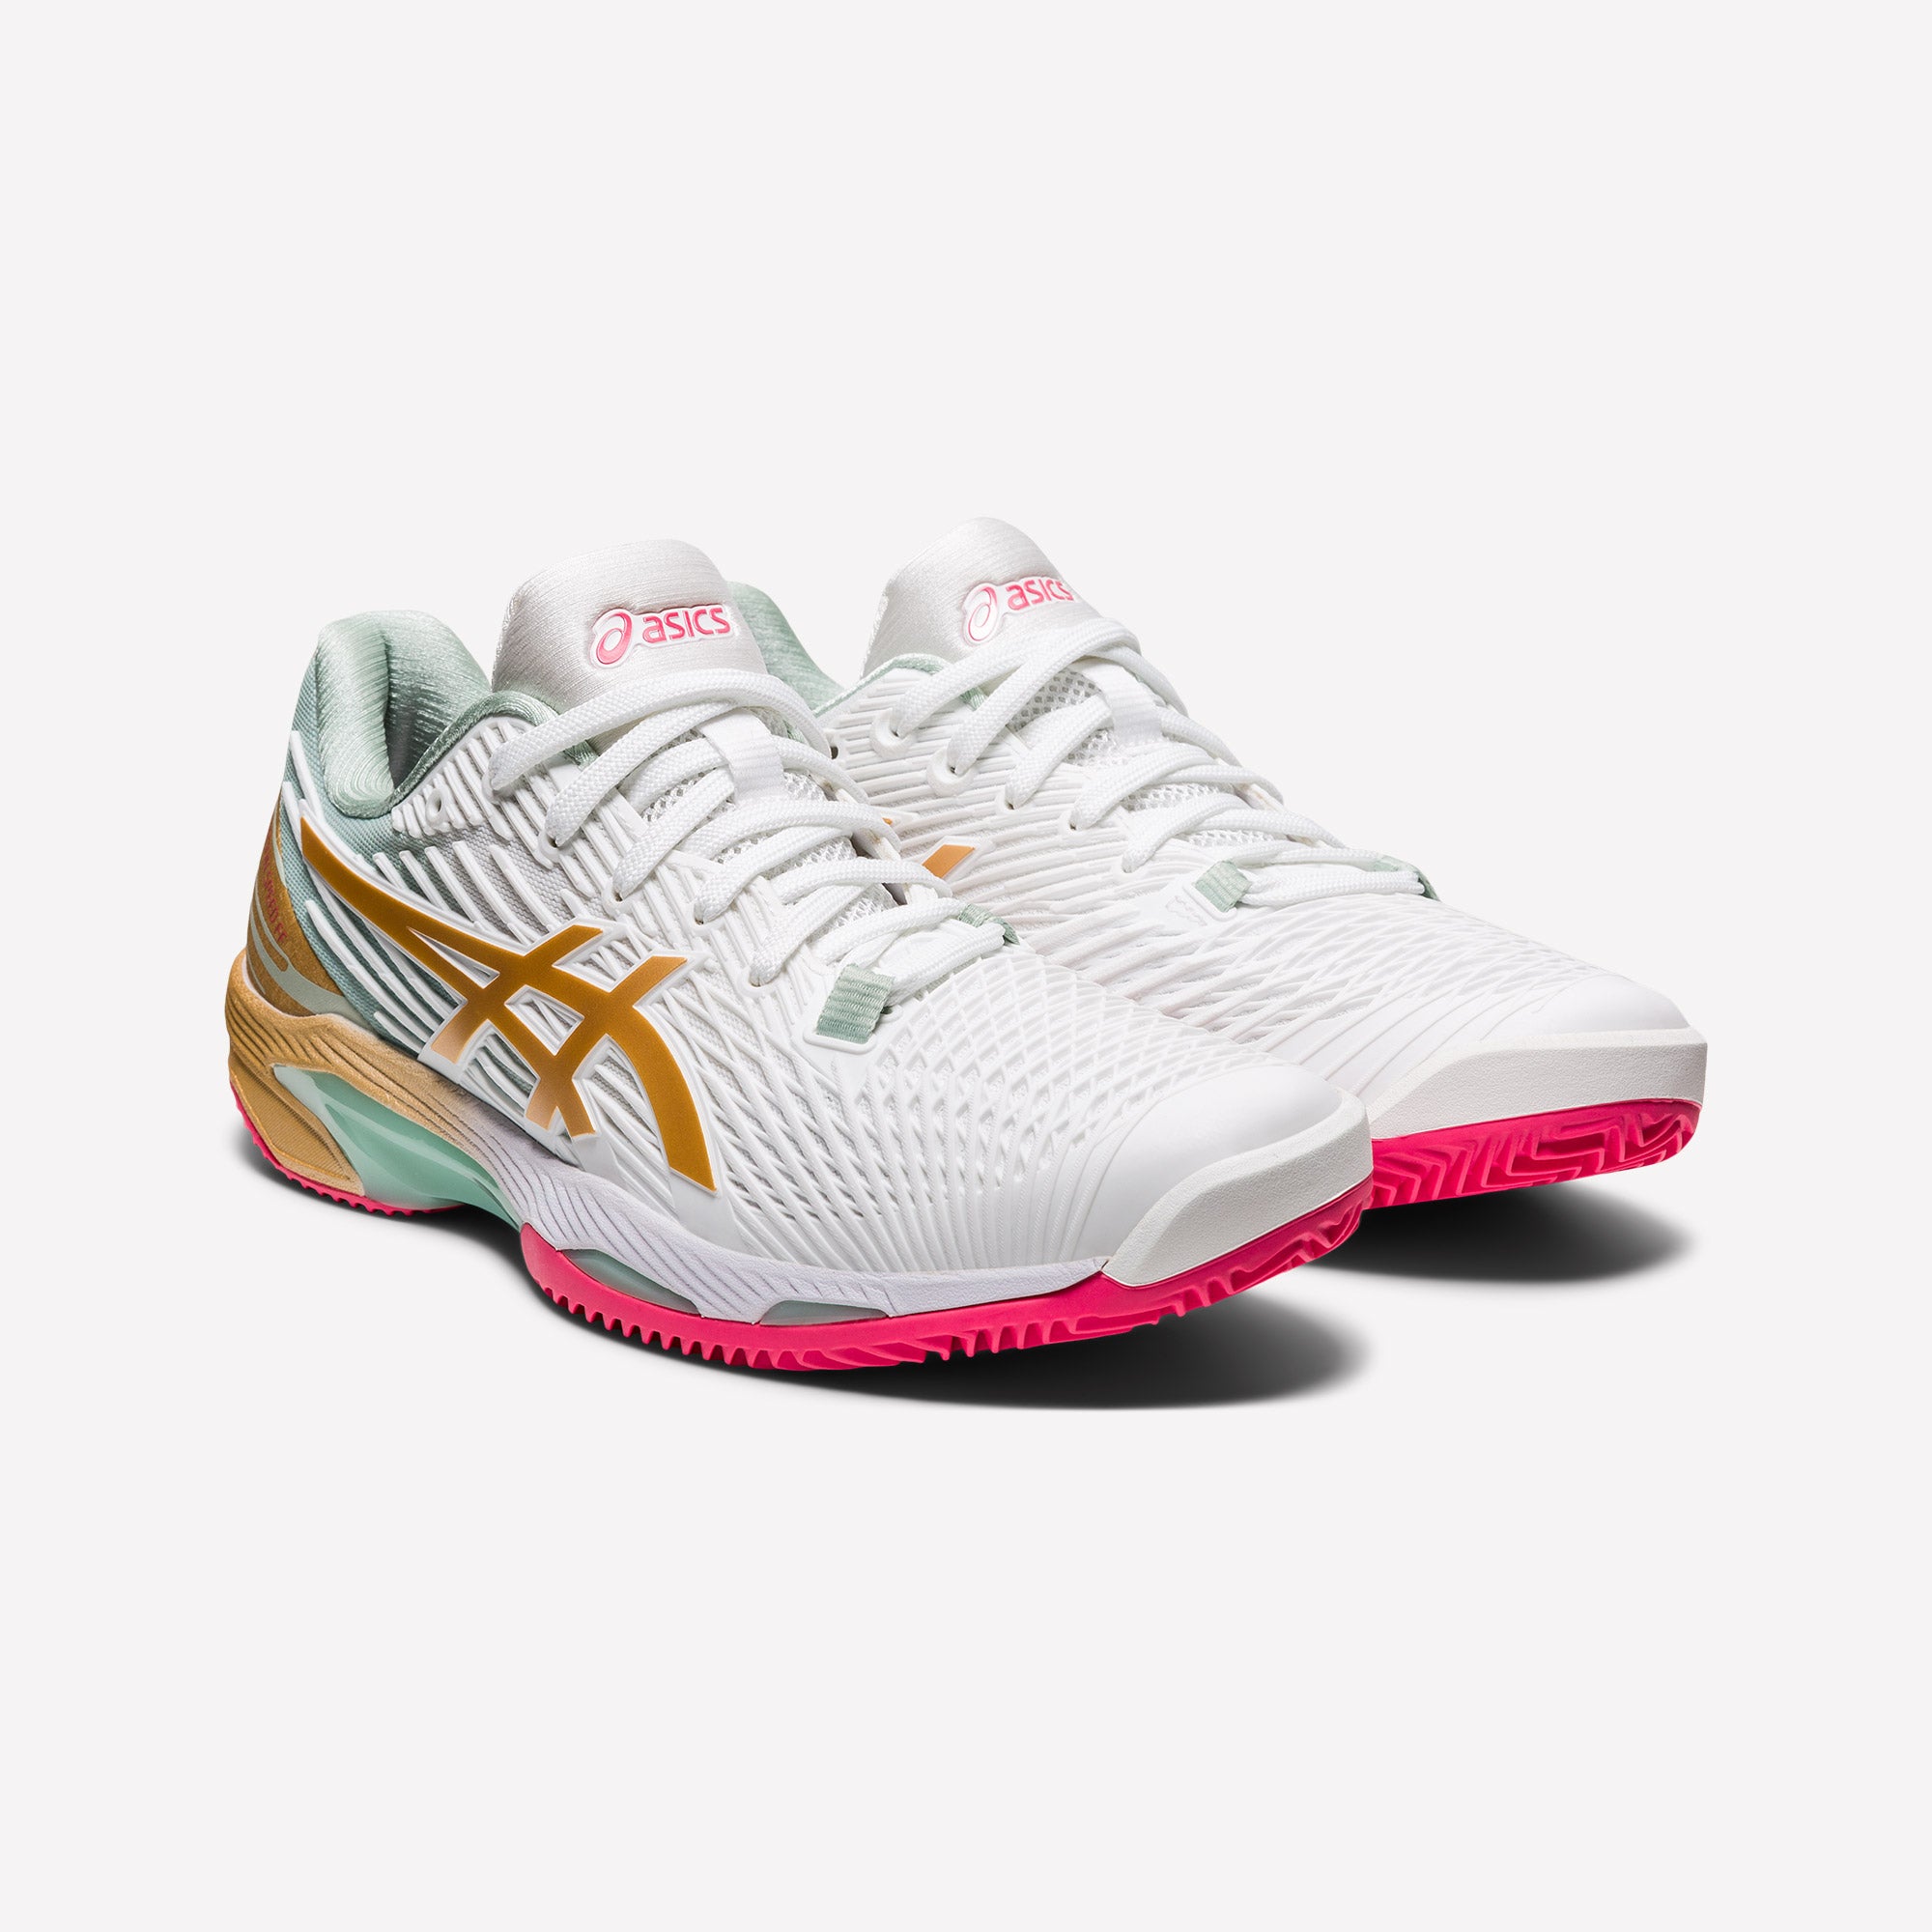 ASICS Limited Edition Solution Speed FF 2 Women's Clay Court Tennis Shoes White (4)